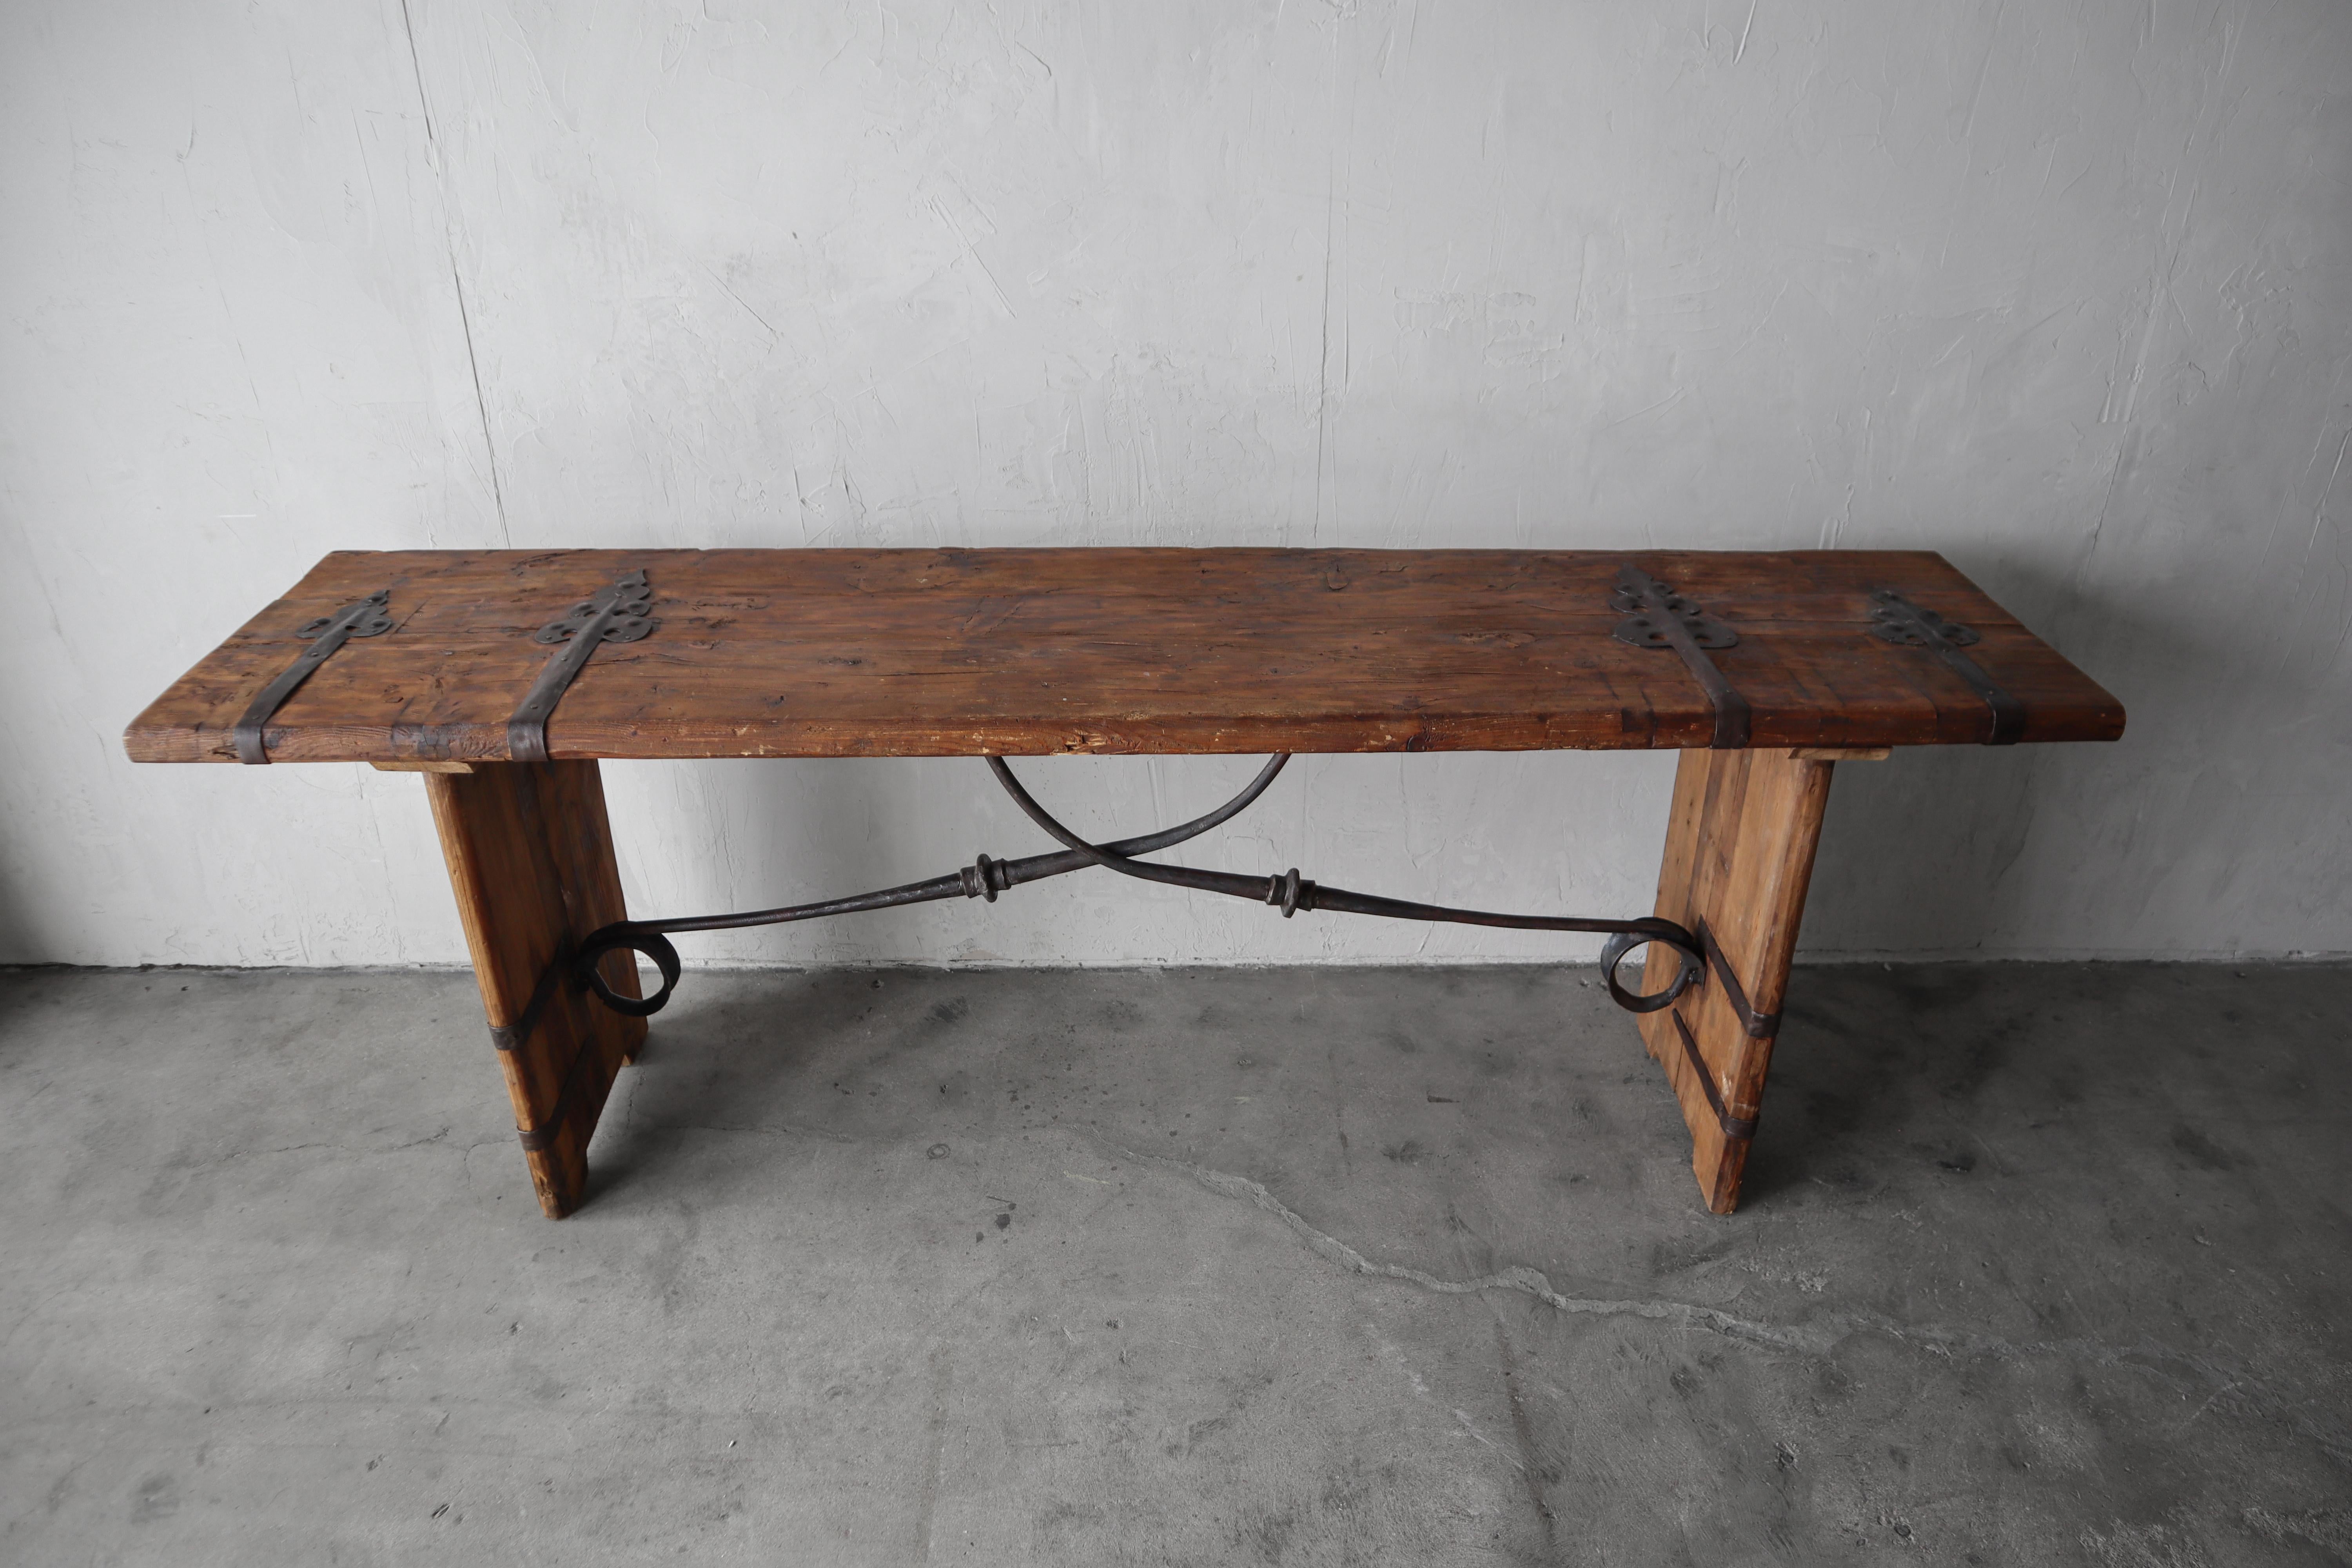 Nice, large rustic console table.  Perfect piece for that entry or large living space in your wabi sabi, rustic or minimalist design.

Table is in good condition with minimal signs of wear from use.  There are natural inclusions and imperfections to